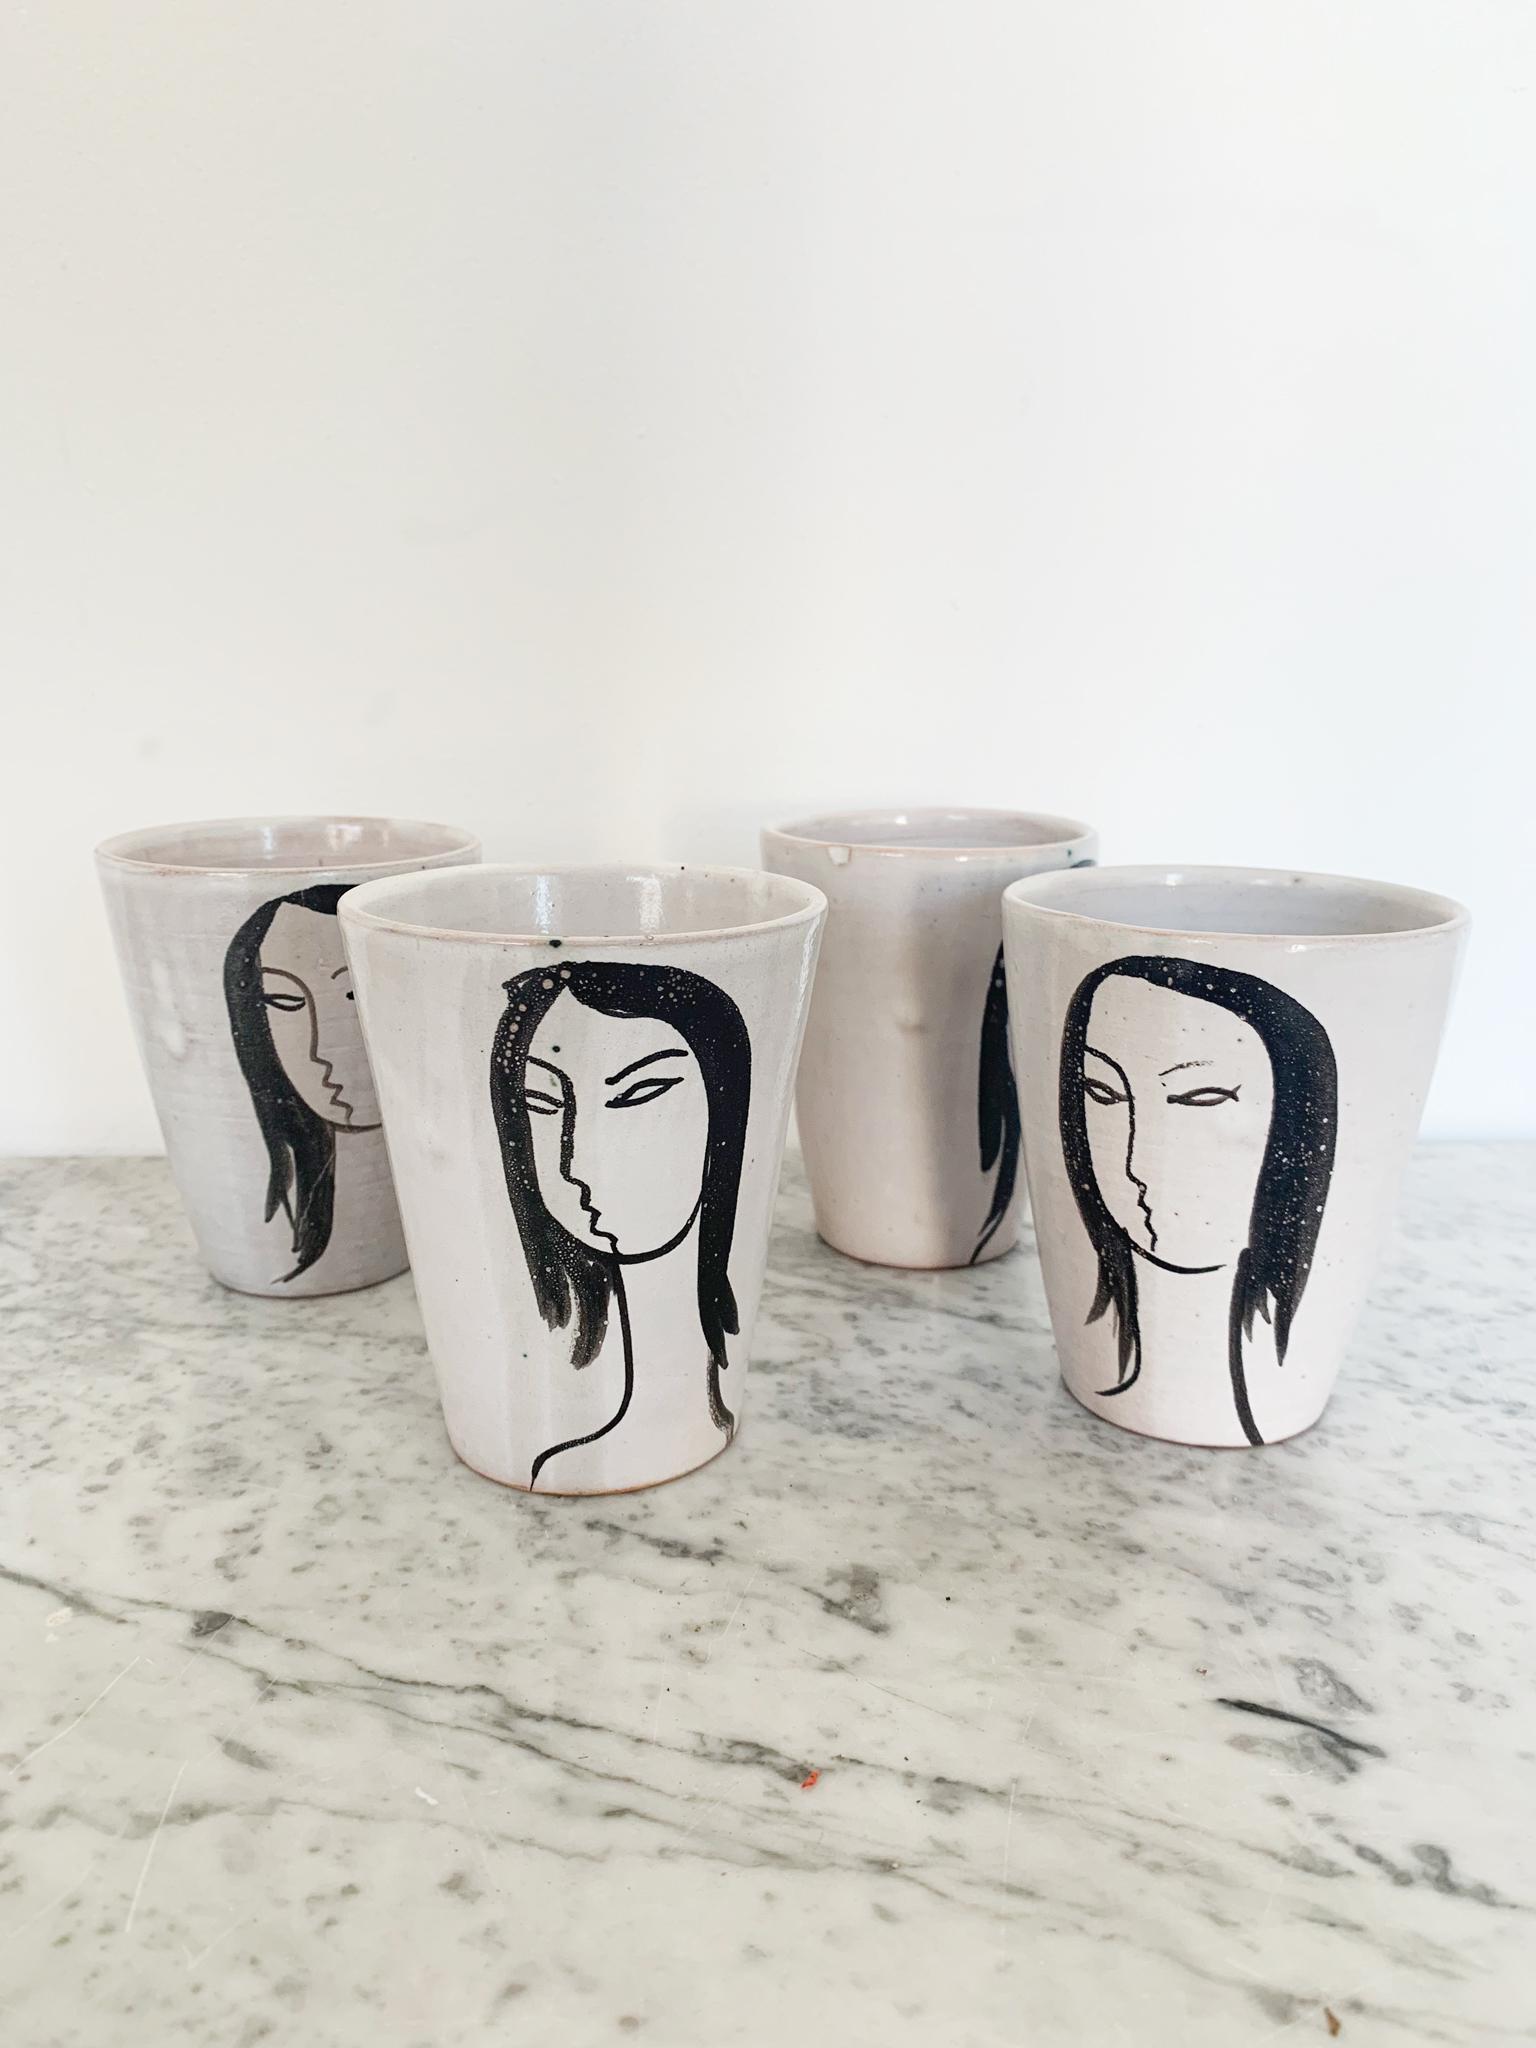 Set of four cups in a white glaze, these pots are skilfully decorated with a profile drawing of a woman. Stamped and Monogrammed Vallauris and Grand Chene pottery.

Grand Chene (Big Oak) pottery was founded in 1949 by Odette Gourju and Ljuba